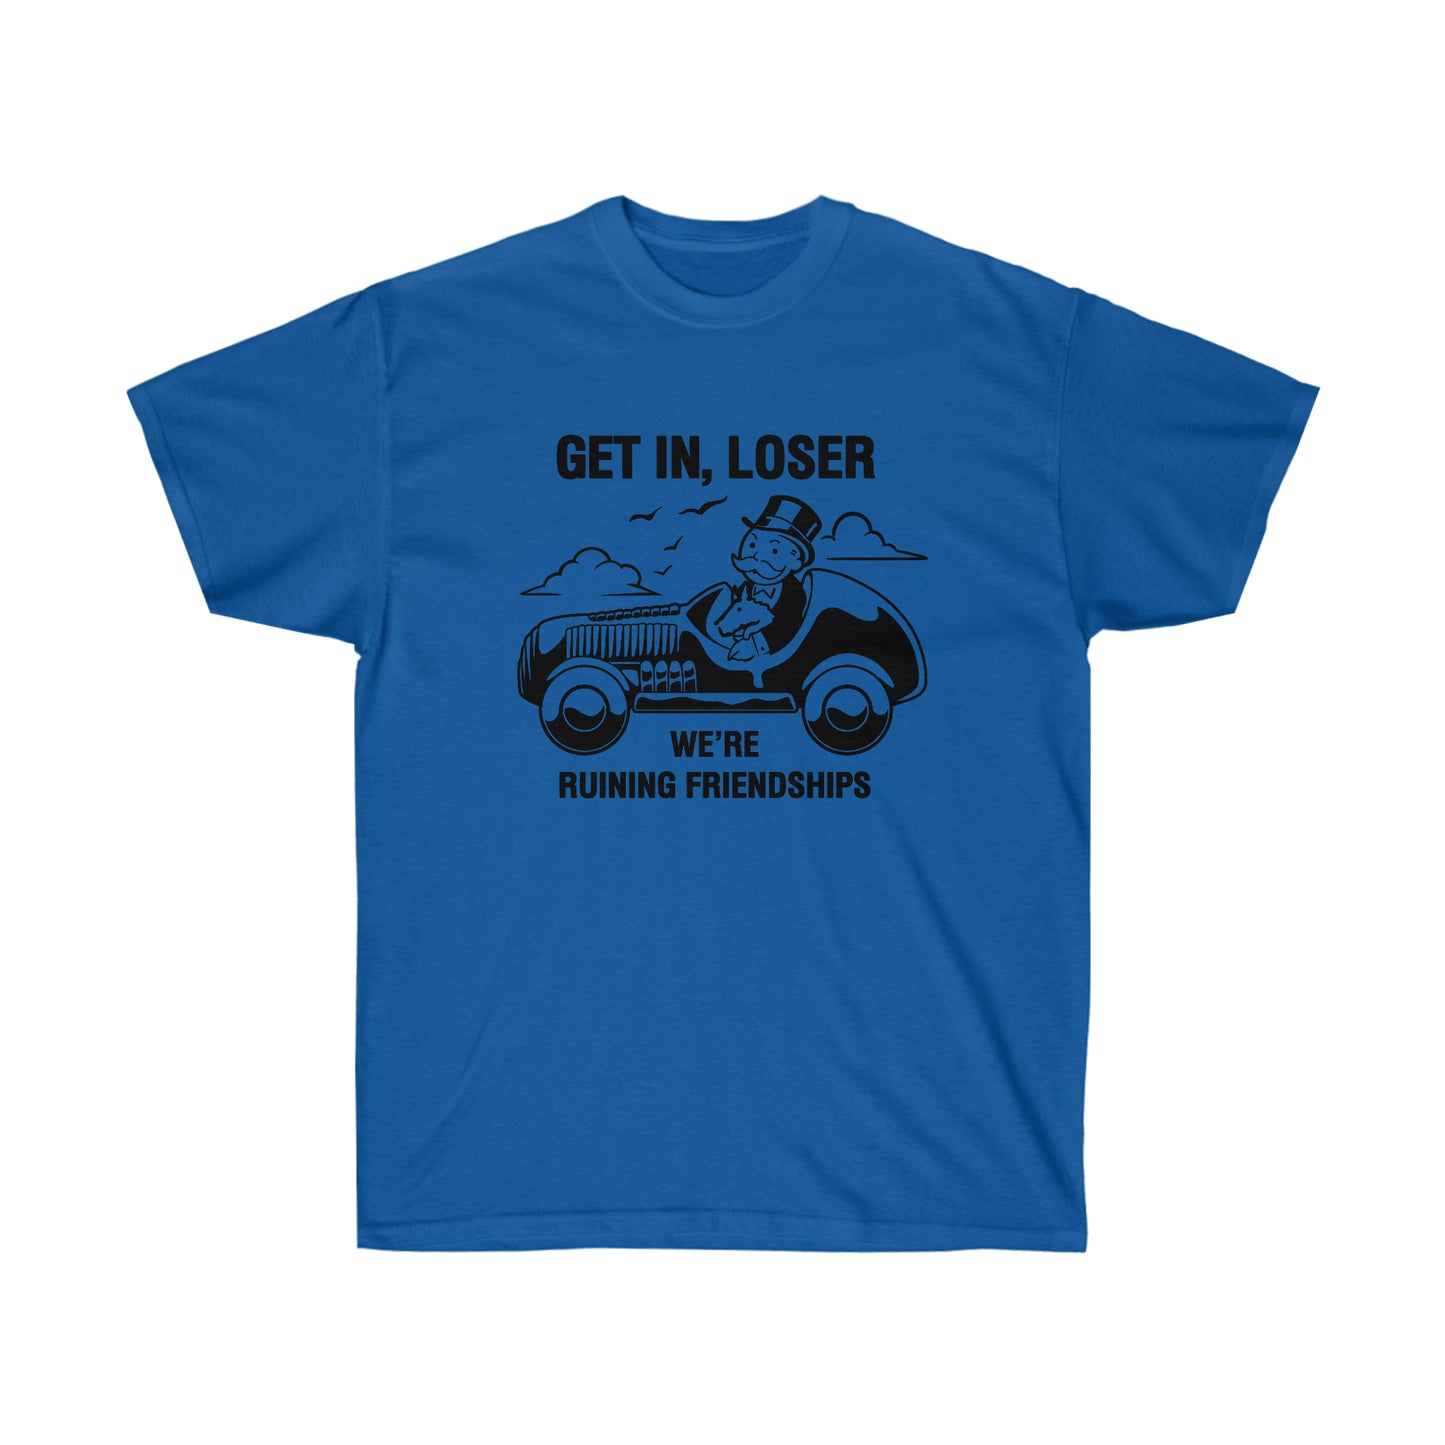 Get in, Loser We're Ruining Friendships t-shirt